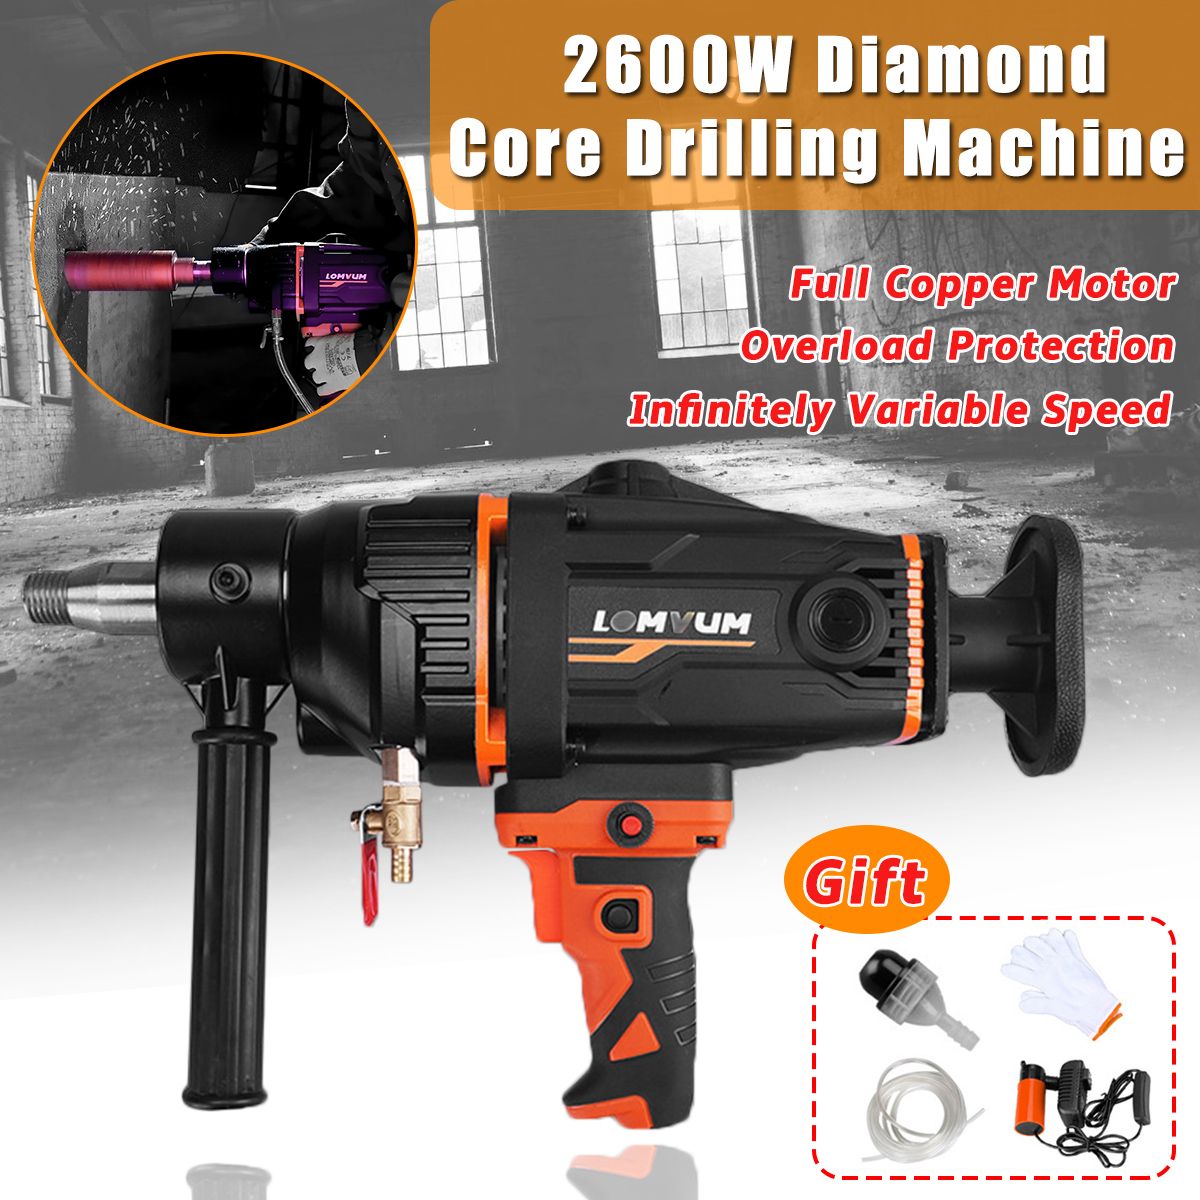 2600W-220V-1800-rpm-Diamond-Core-Hole-Puncher--Drilling-Machine-Infinitely-Variable-Speed-4-Styles-1598415